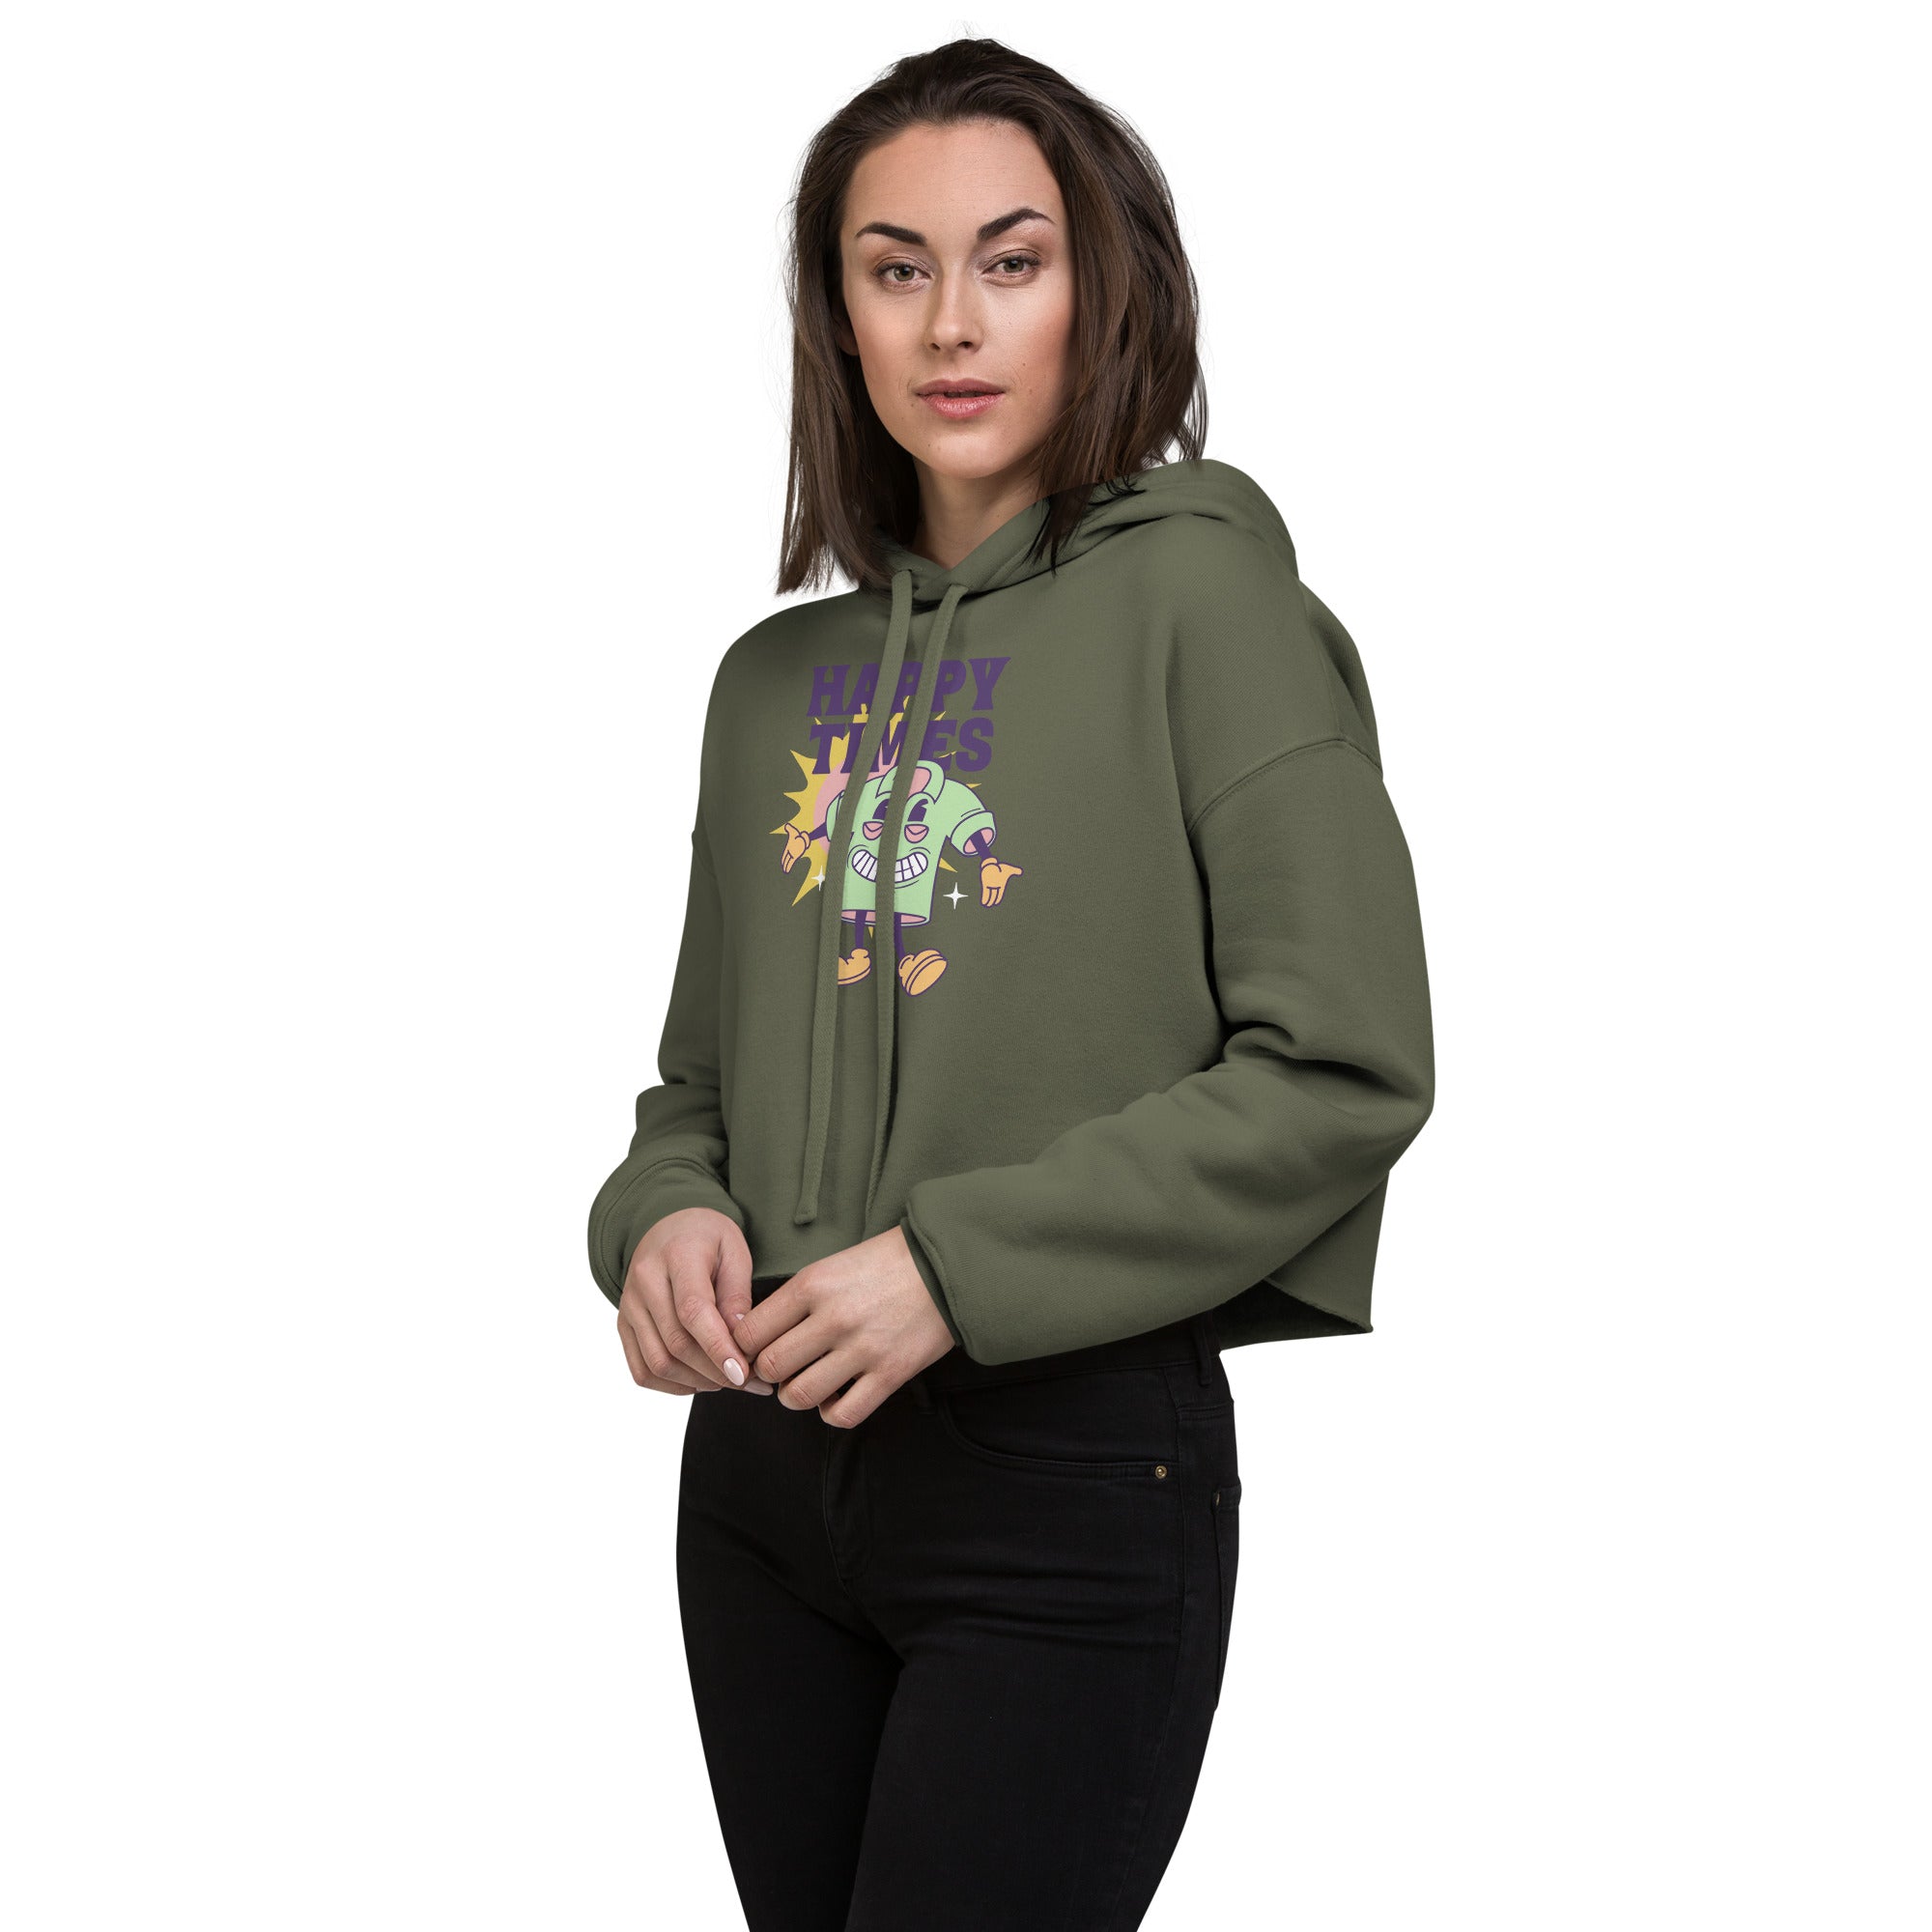 SORTYGO - Happy Times Cropped Hoodie in Military Green